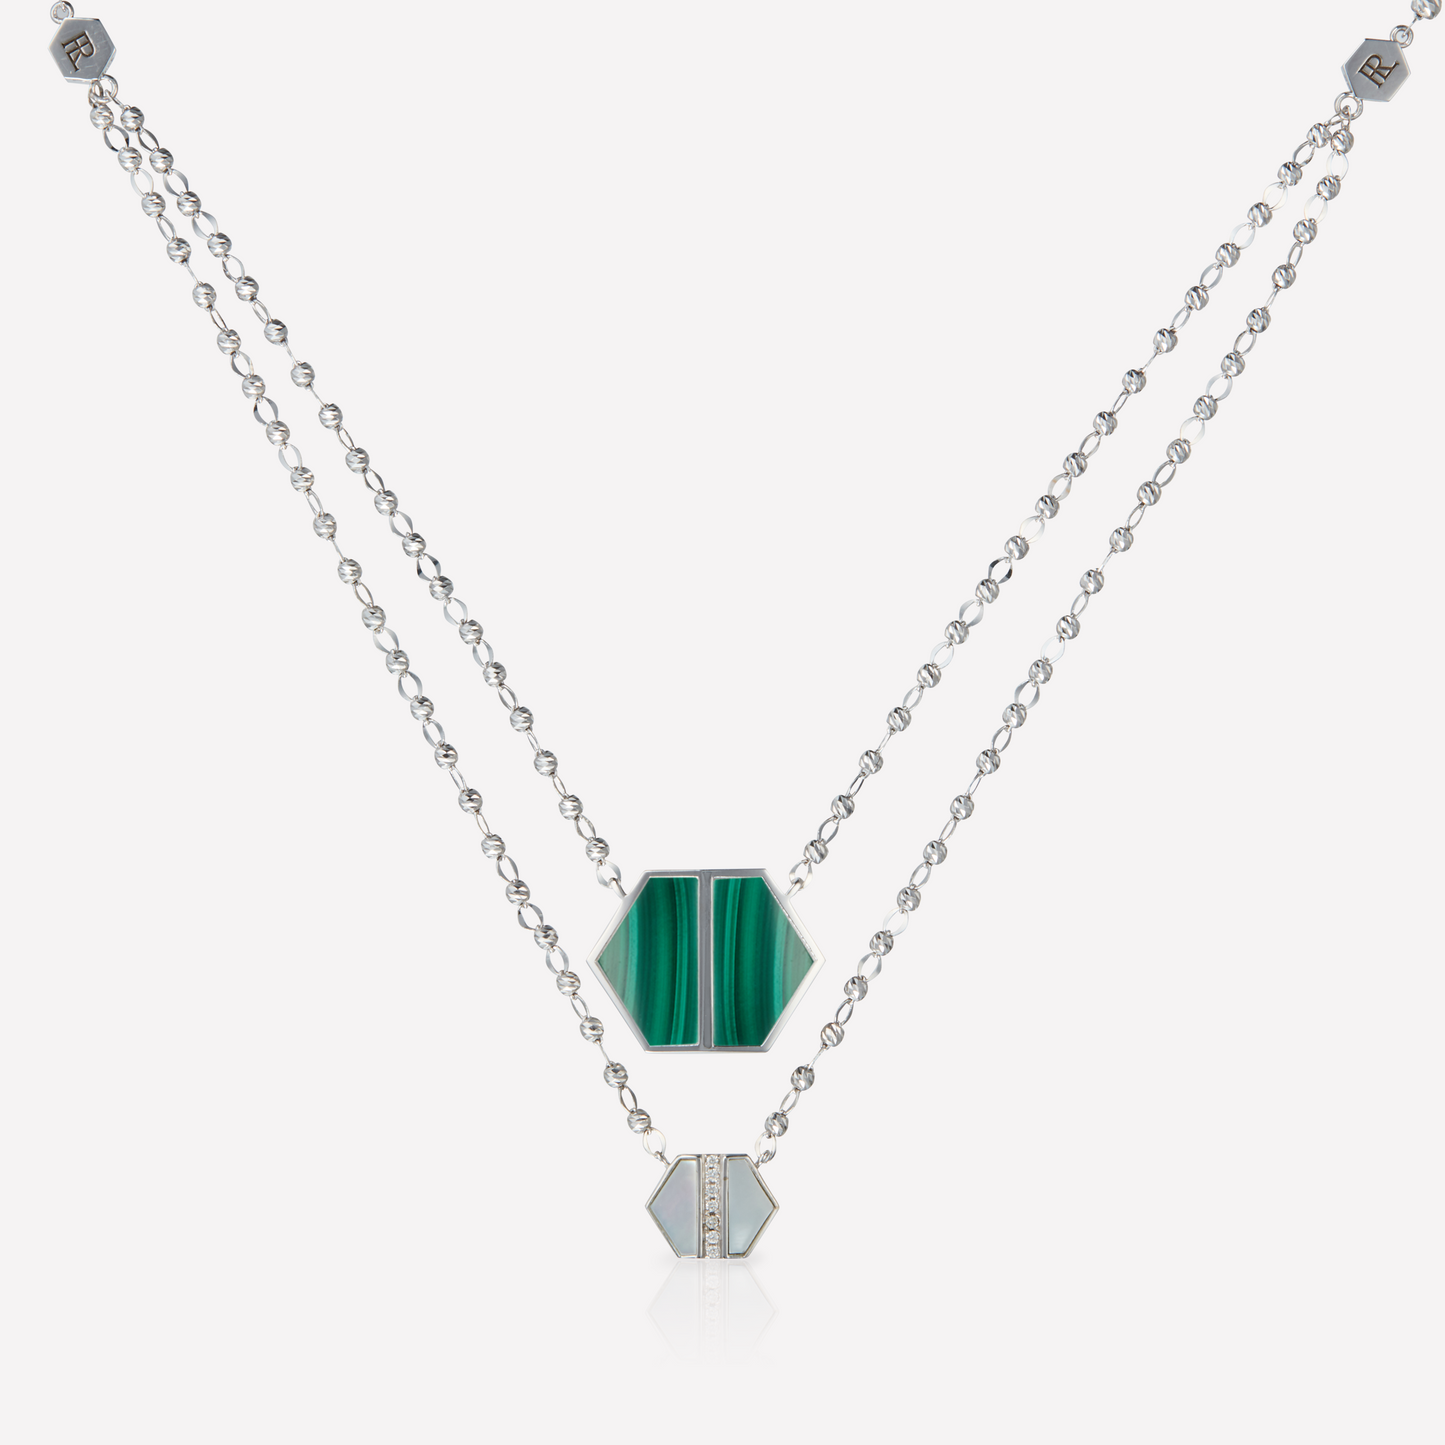 VOID Filled By You Necklace, Large, Malachite, Diamond S